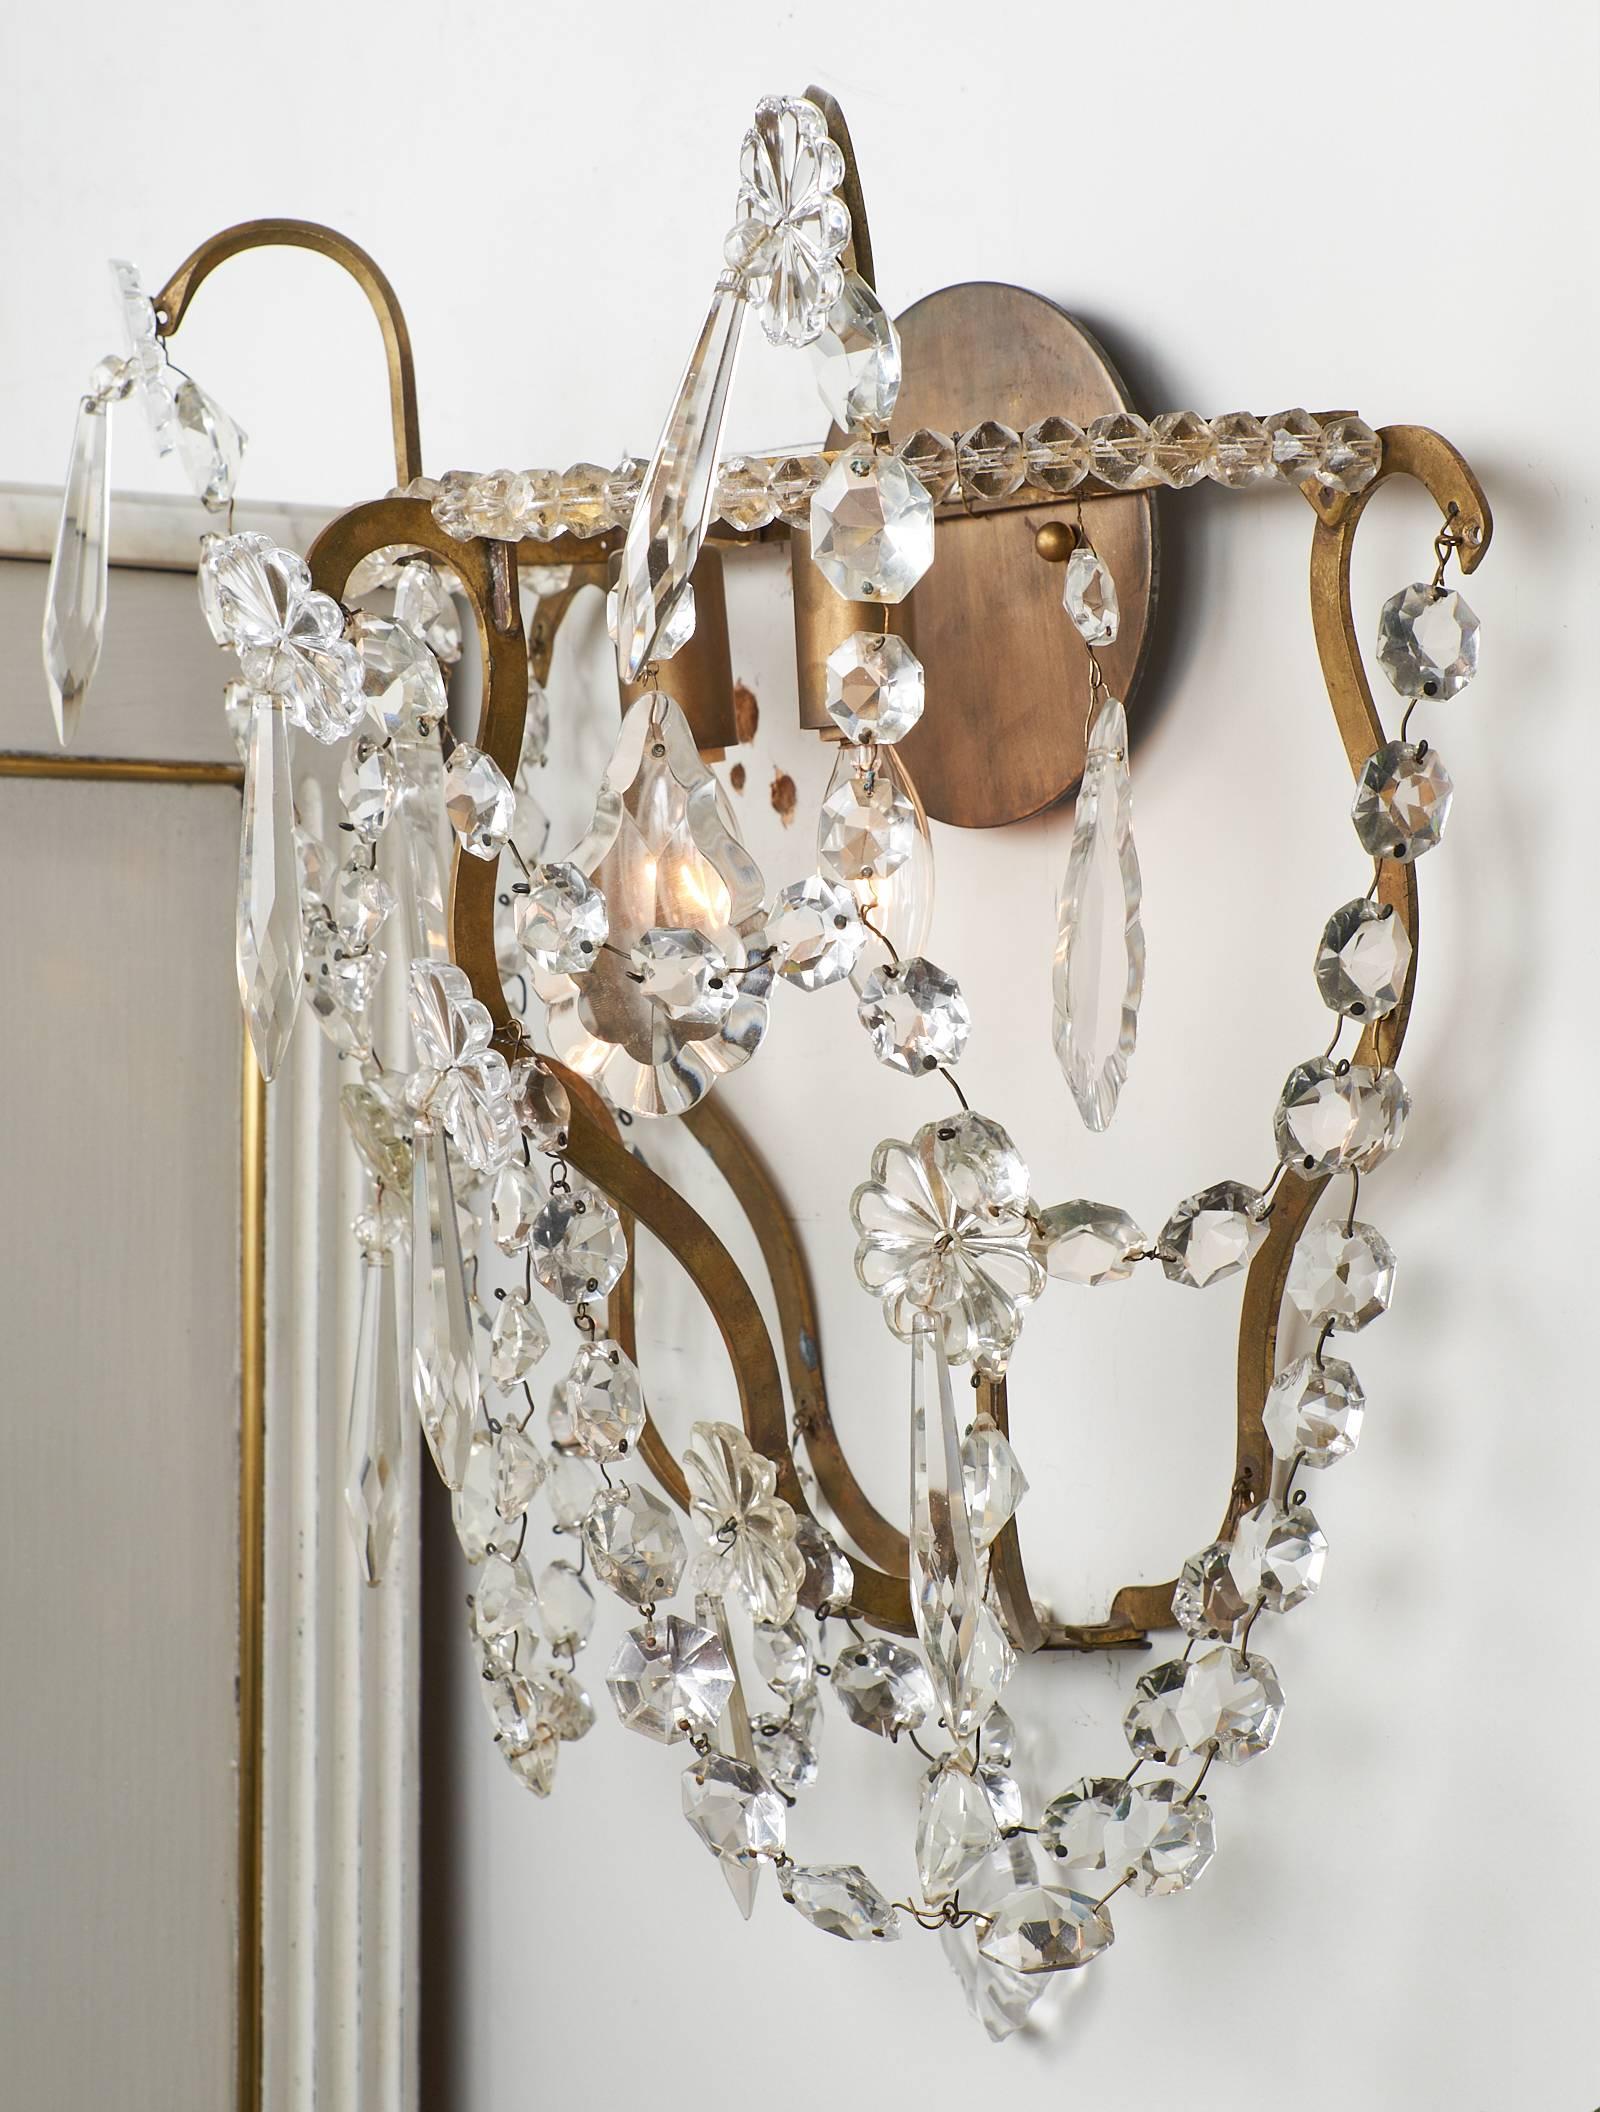 Mid-20th Century Vintage French Sconces in the Style of Maison Baguès